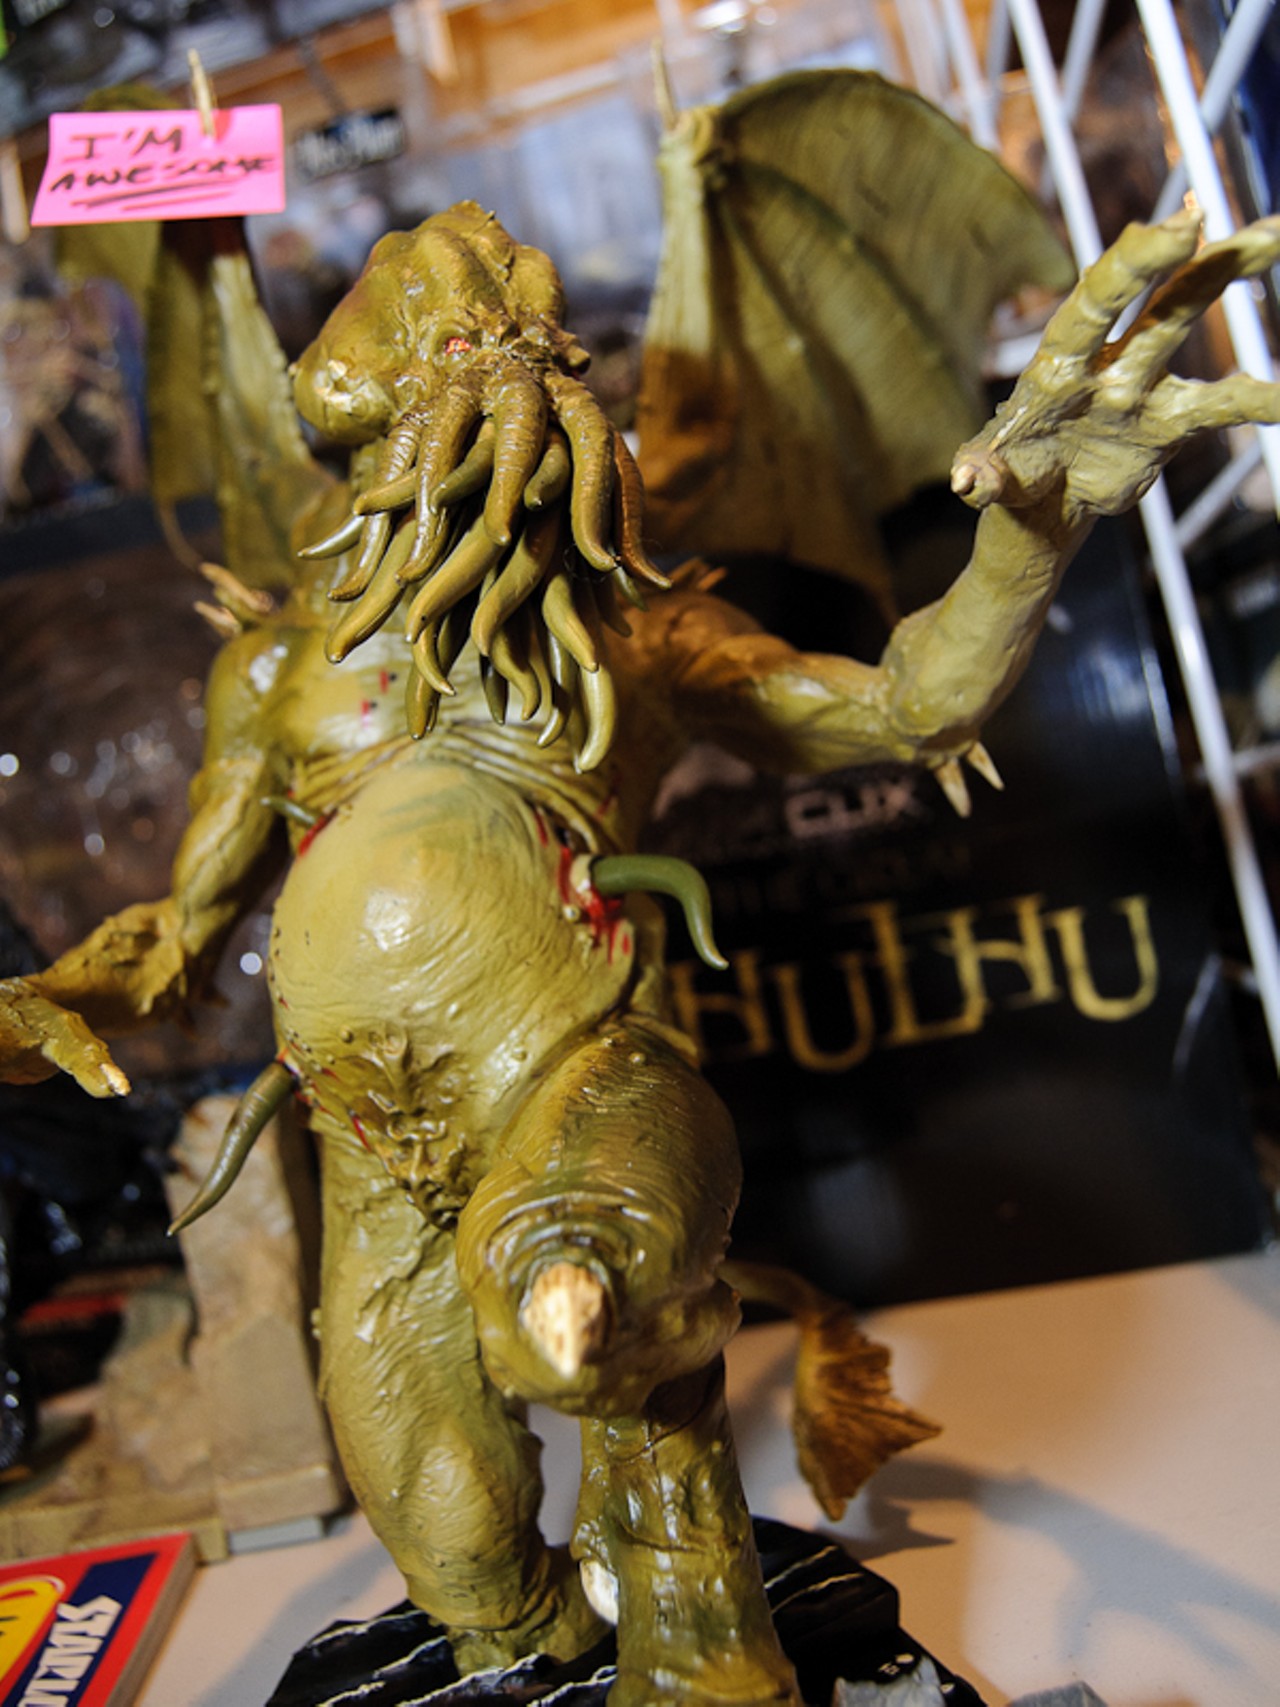 "I'm Awesome," read the note on this Cthulhu figurine. Nobody argued.